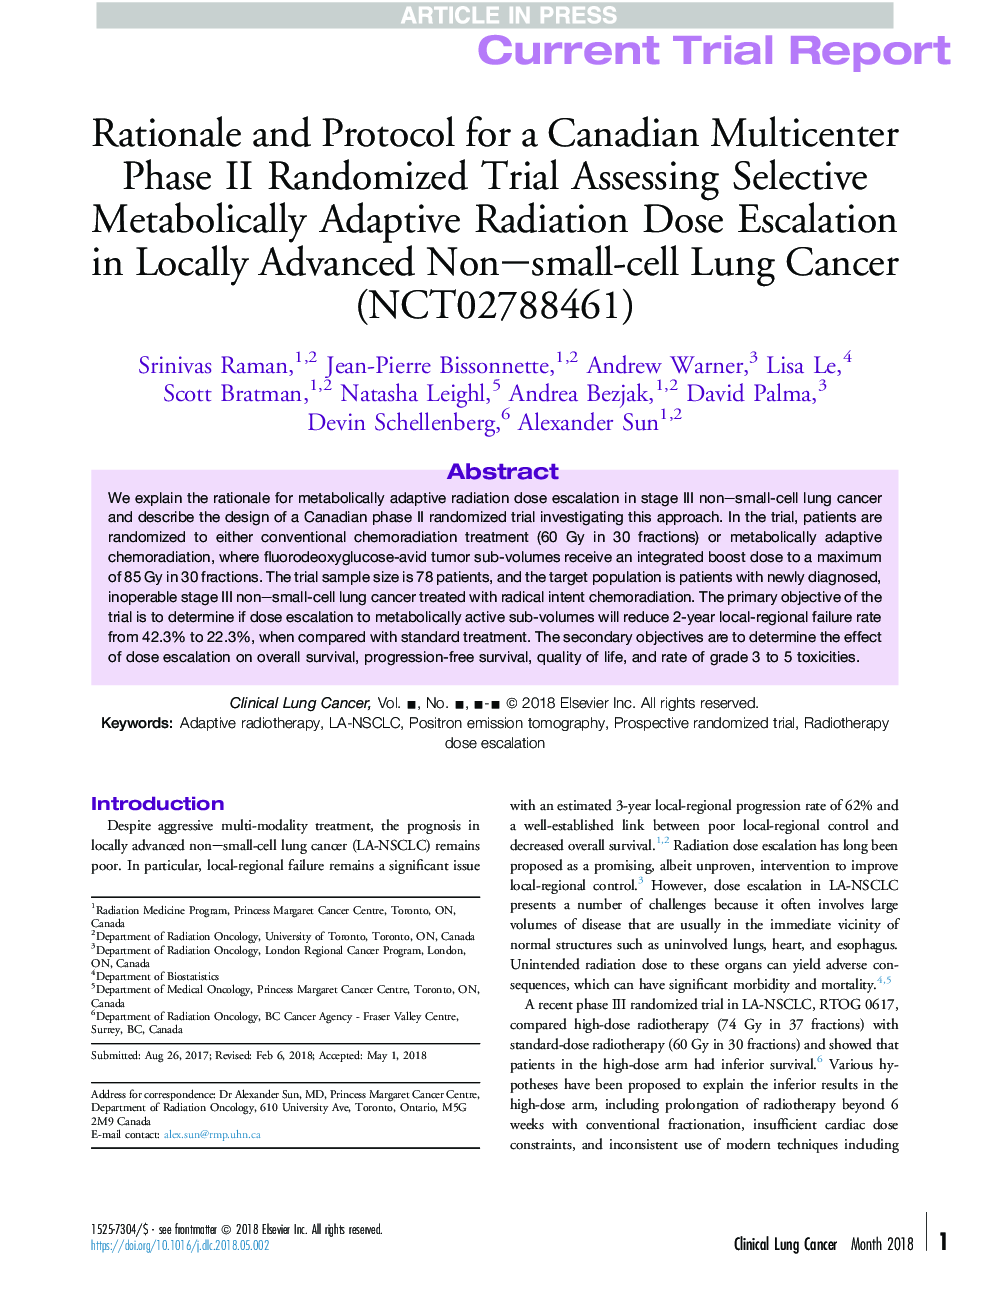 Rationale and Protocol for a Canadian Multicenter Phase II Randomized Trial Assessing Selective Metabolically Adaptive Radiation Dose Escalation in Locally Advanced Non-small-cell Lung Cancer (NCT02788461)